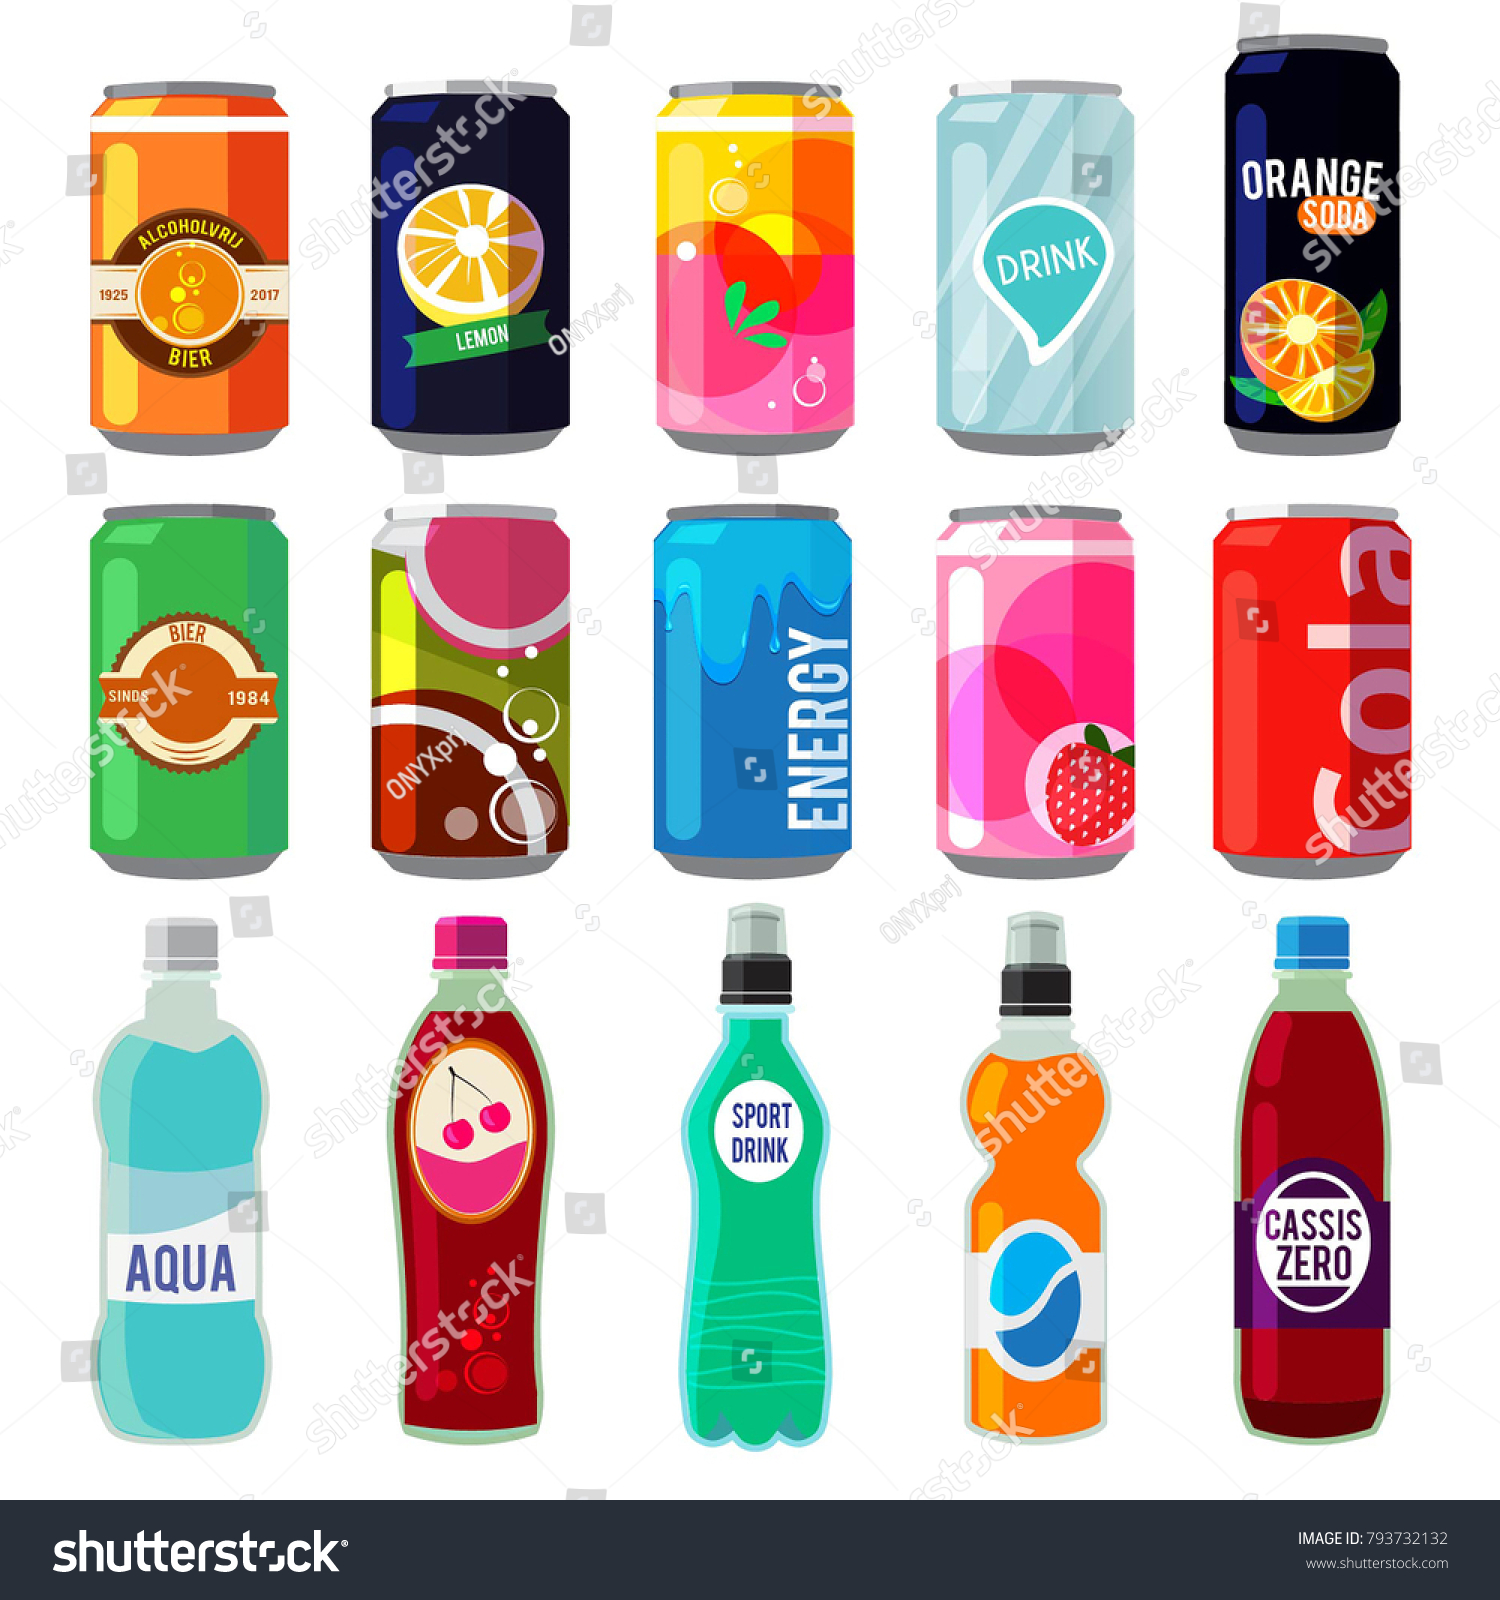 Download Illustration Different Drinks Metallic Cans Bottles Stock Vector Royalty Free 793732132 PSD Mockup Templates